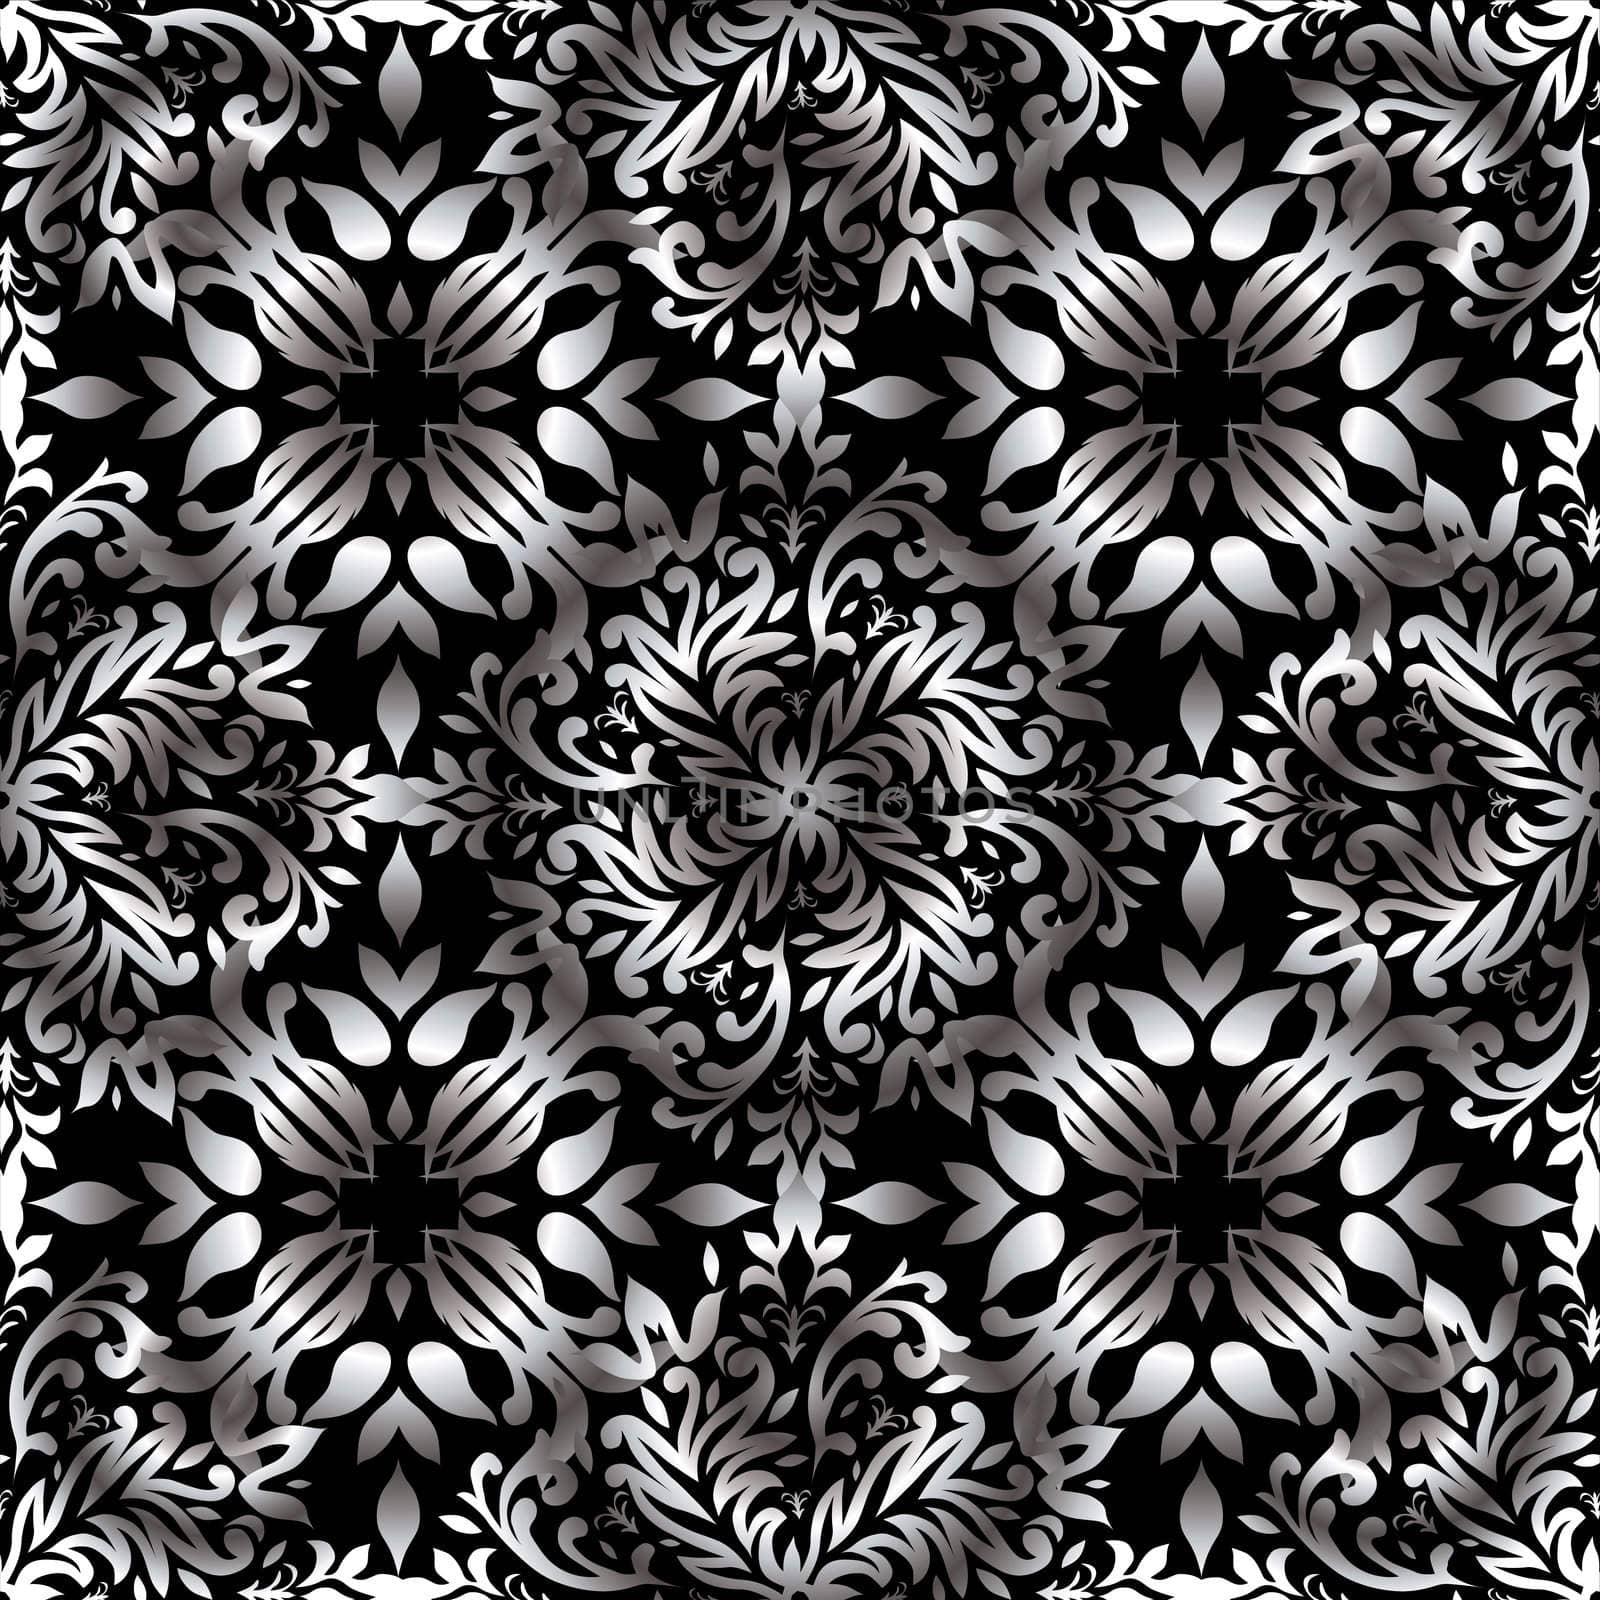 illustrated wallpaper design in with a floral theme in black